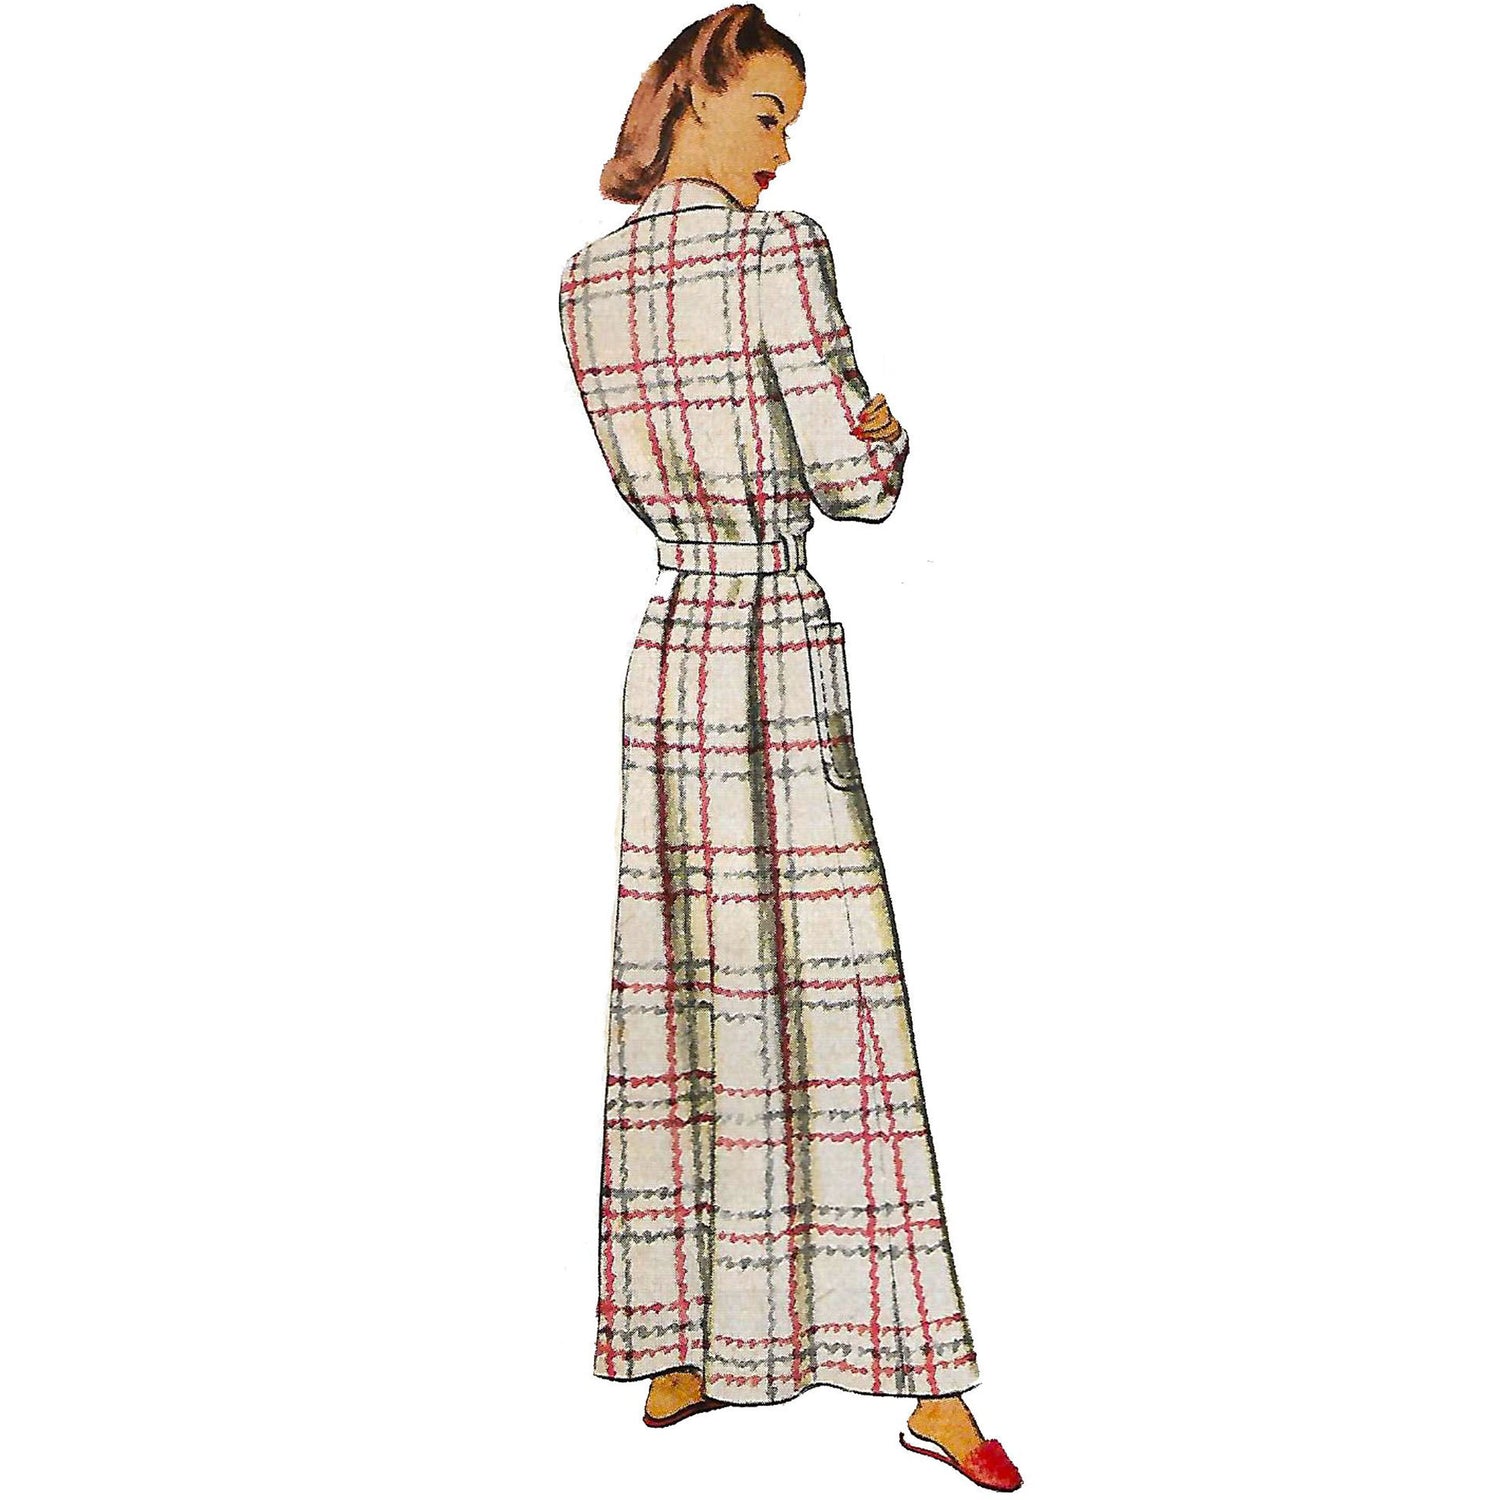 Model wearing 1940s housecoat made from McCall’s 7097 pattern